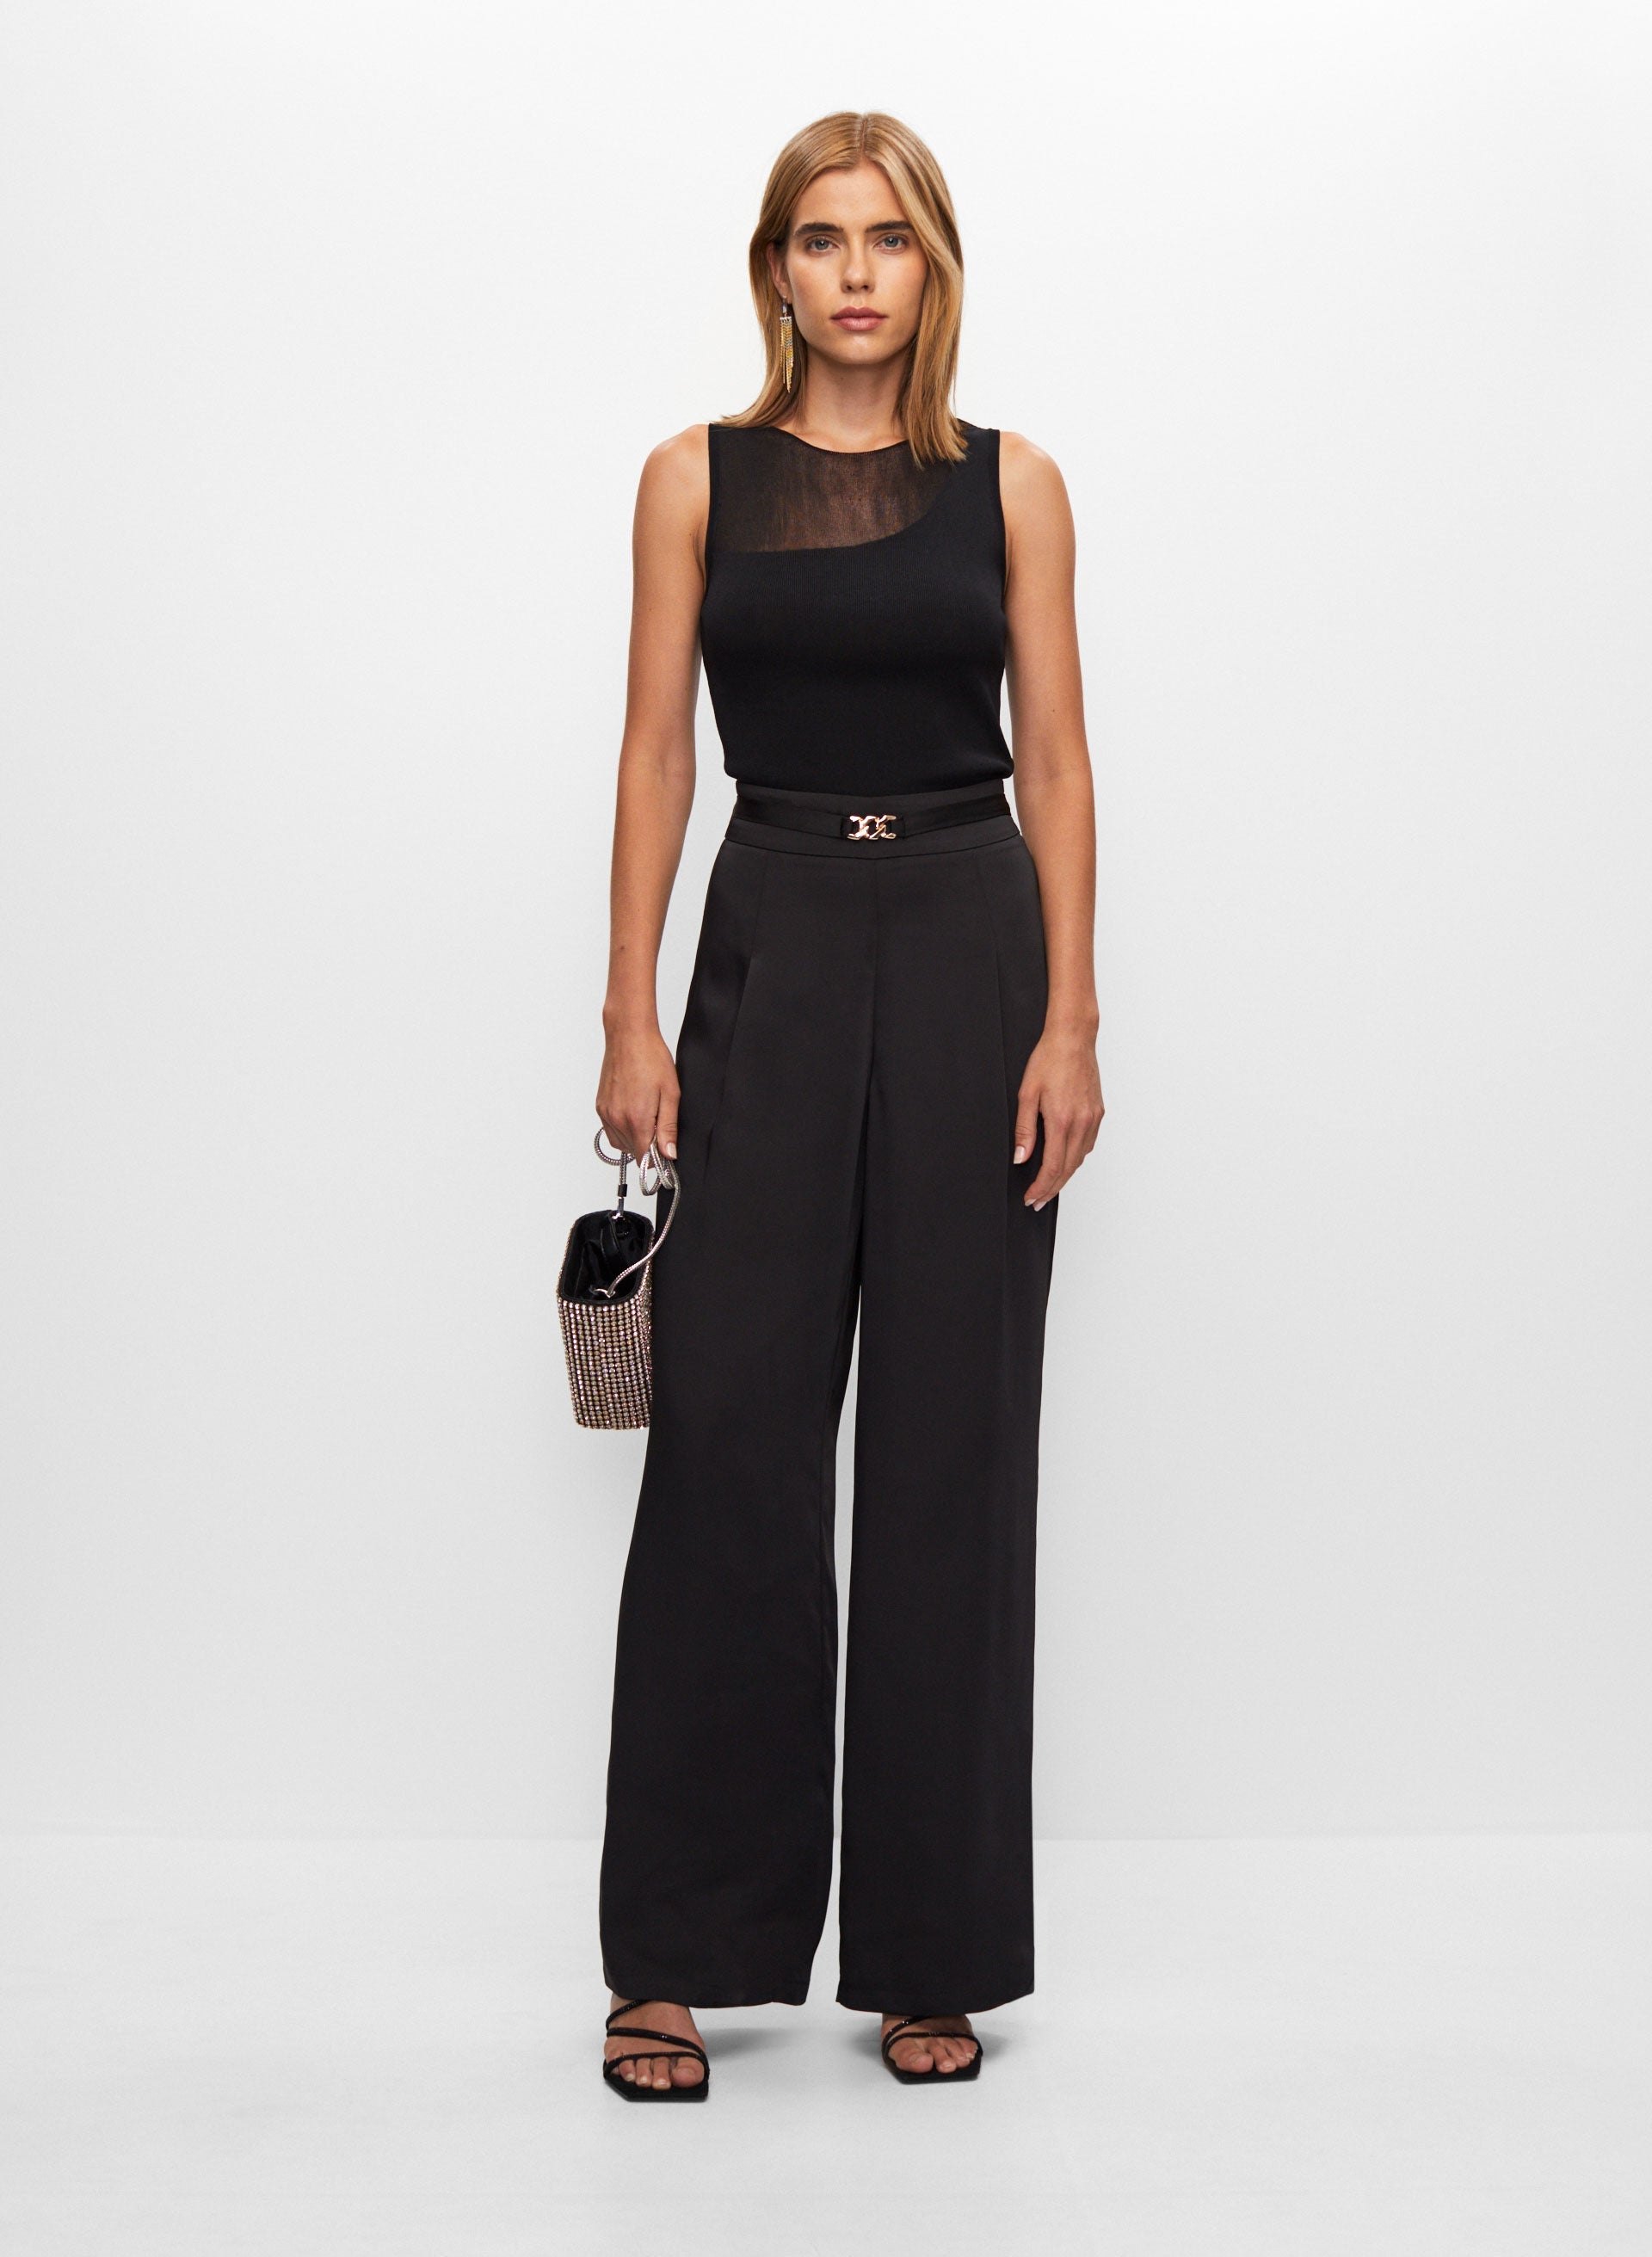 Illusion Neck Top & Belted Pants